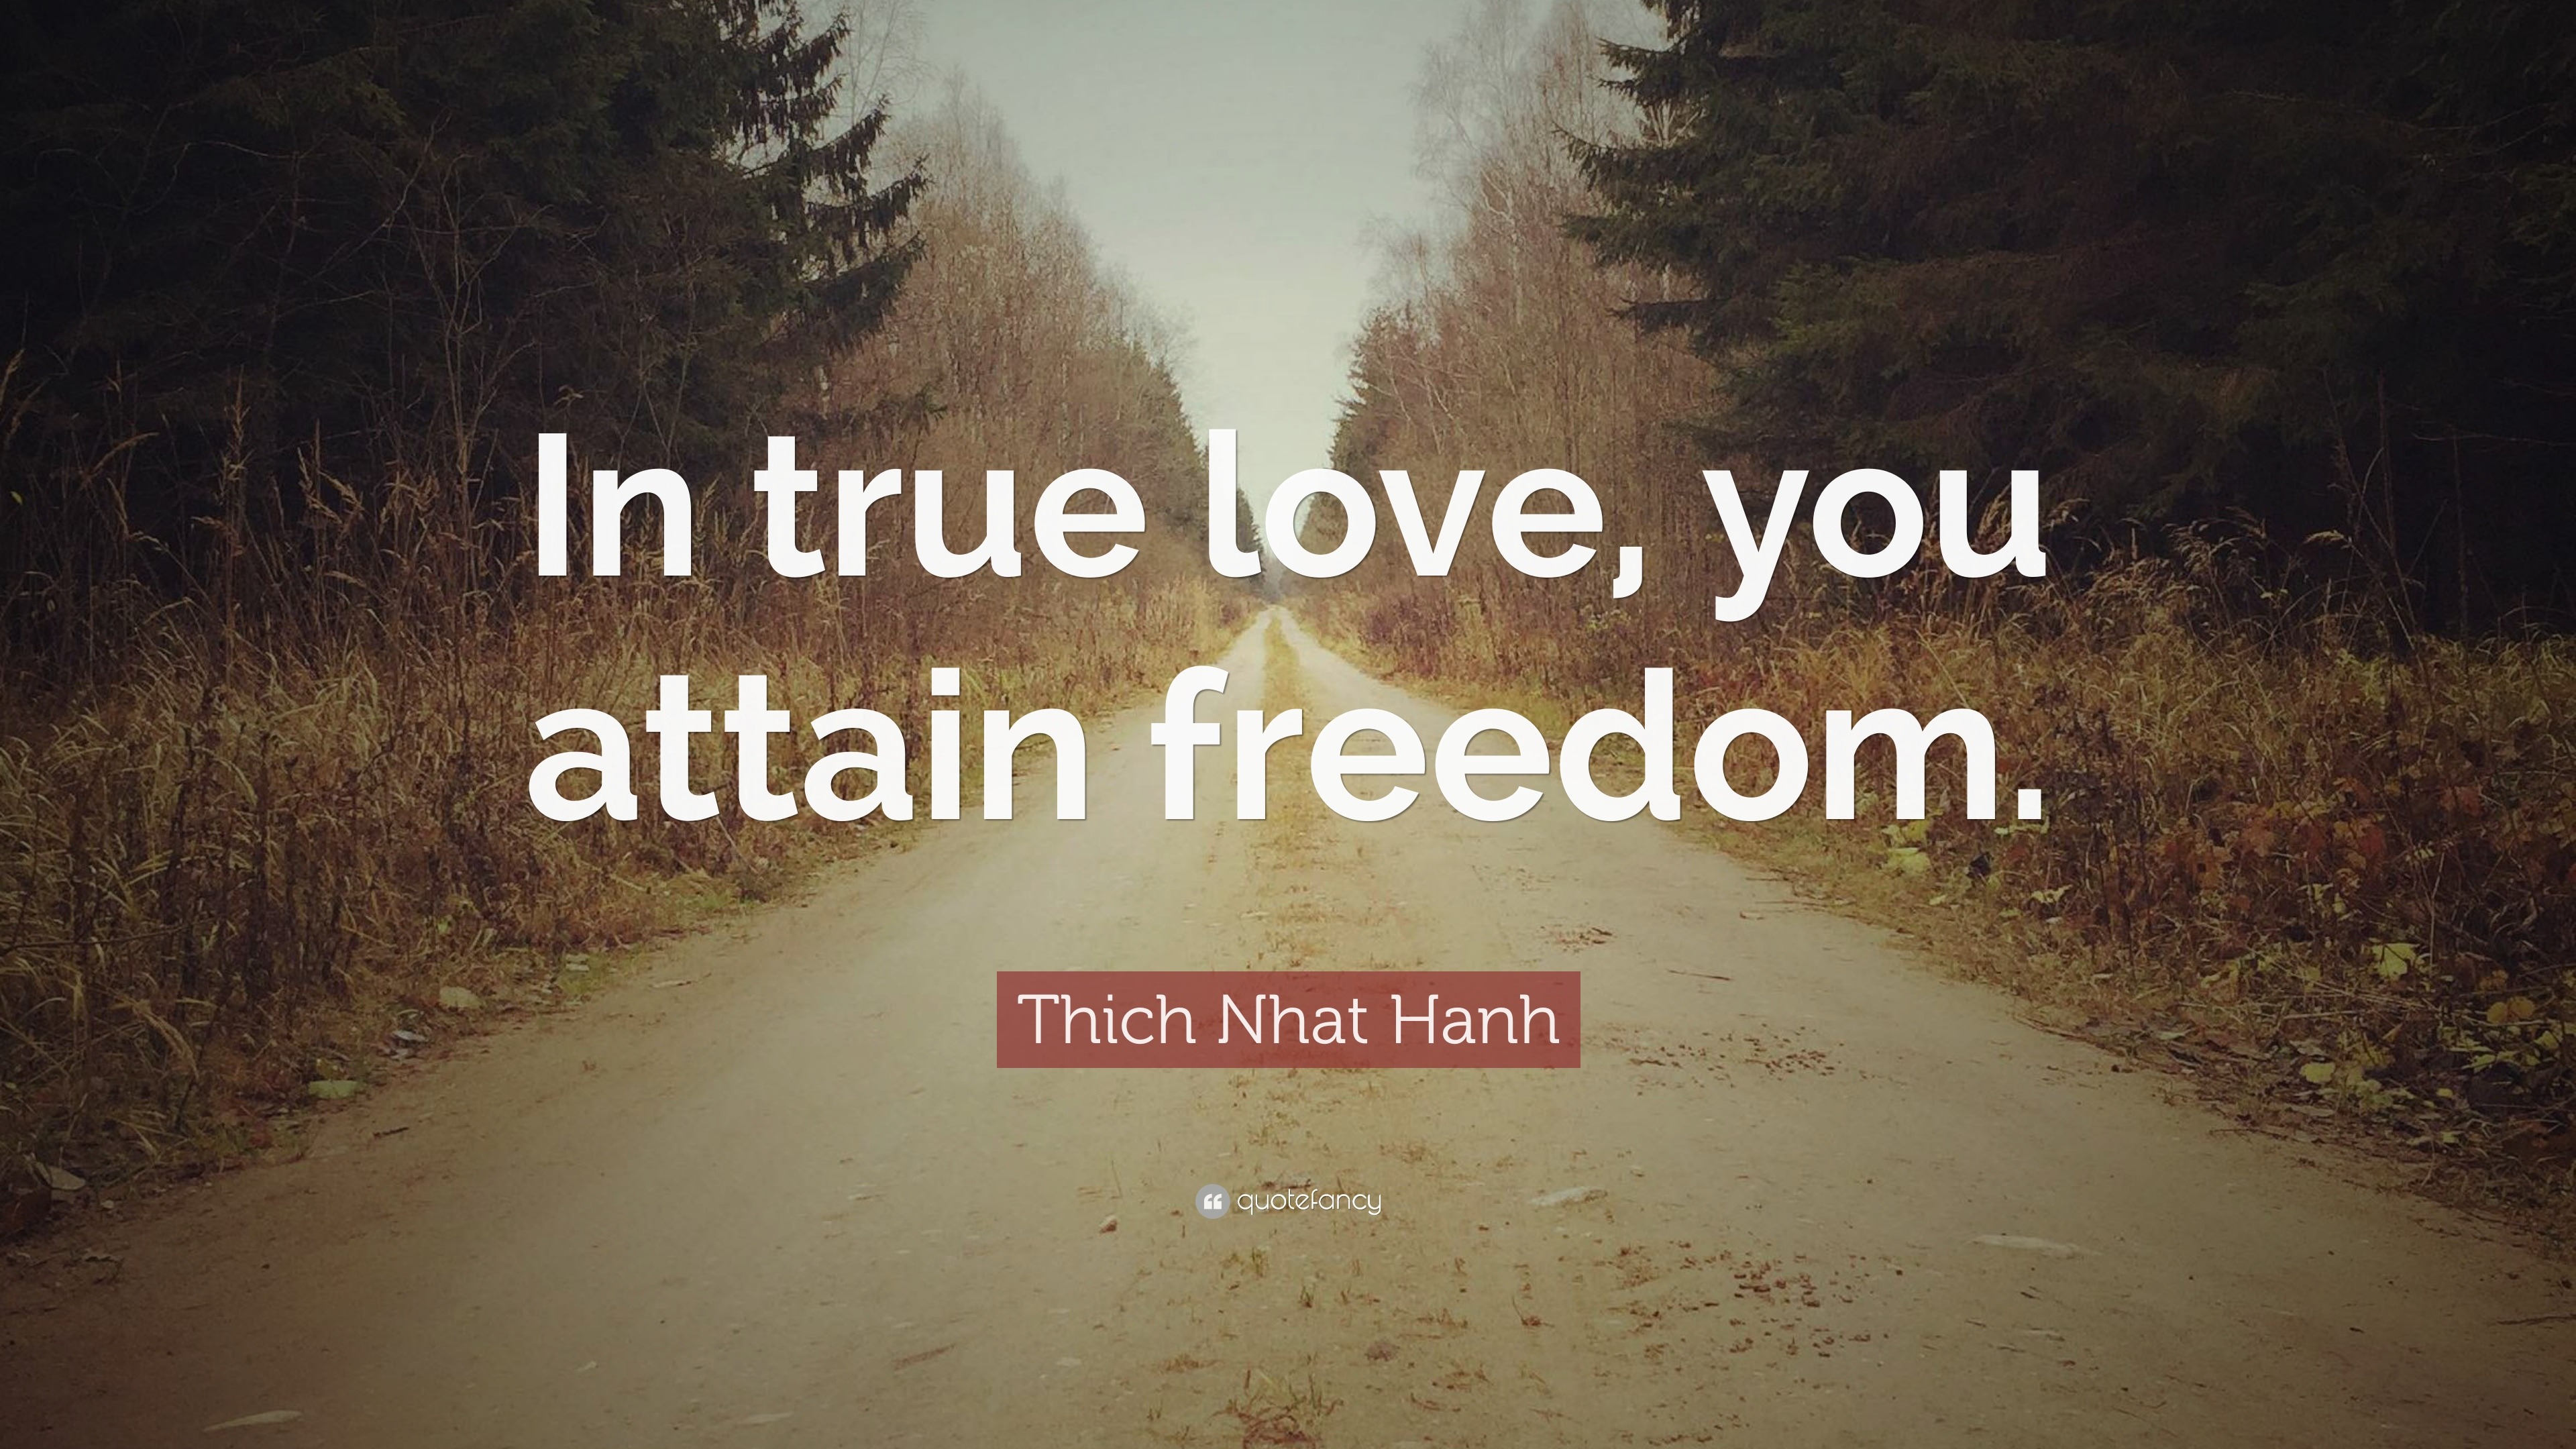 Thich Nhat Hanh Quote “In true love you attain freedom ”